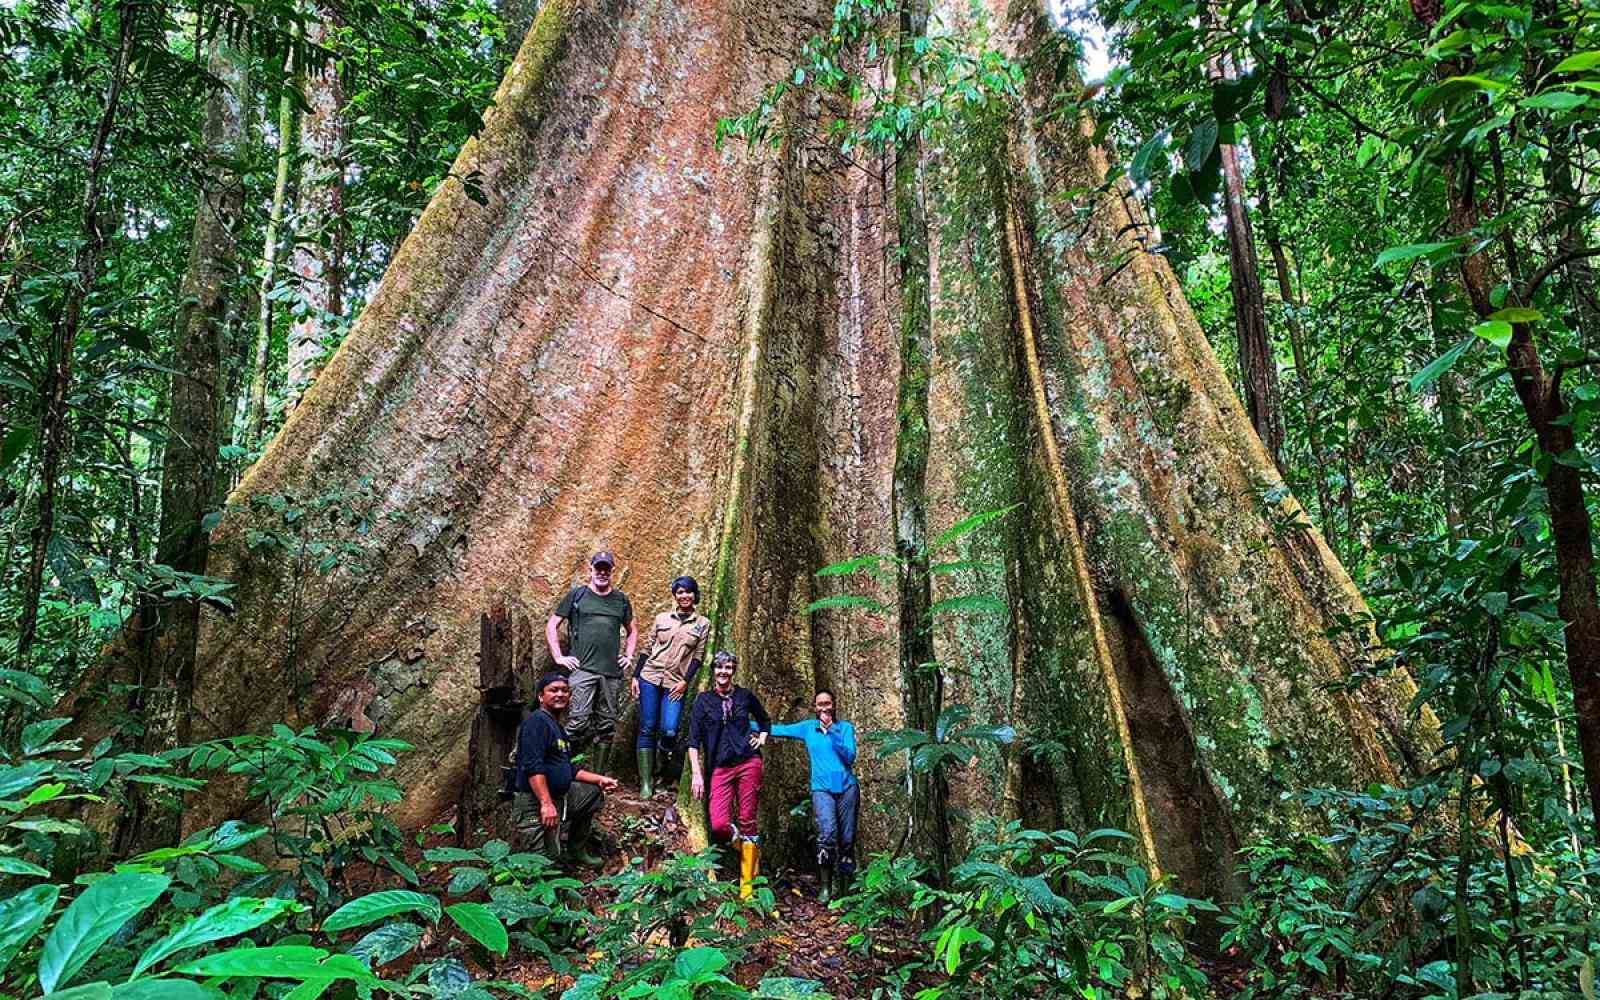 People standing in front of massive tree